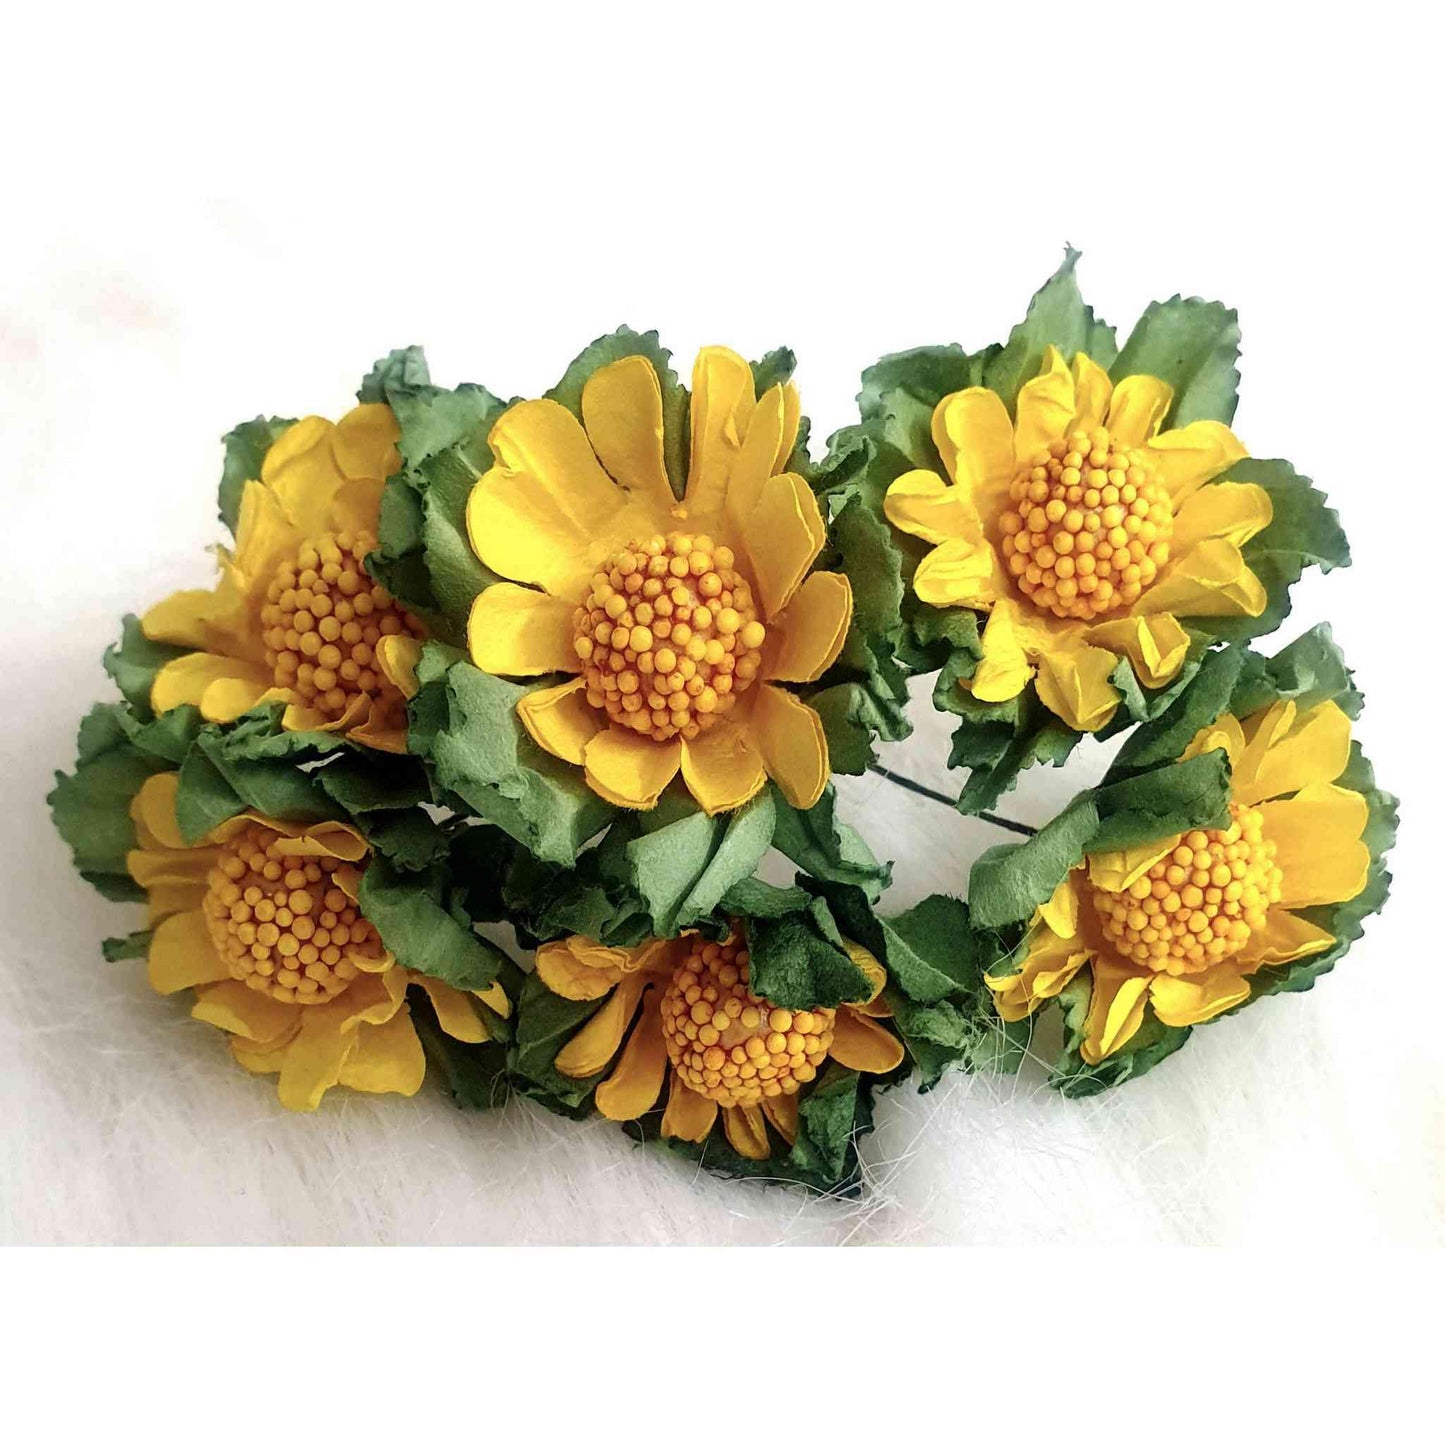 Indian Petals Beautiful Paper Flowers with Leaf for DIY Craft, Trouseau Packing or Decoration (Bunch of 12) - Design 33, Yellow - Indian Petals